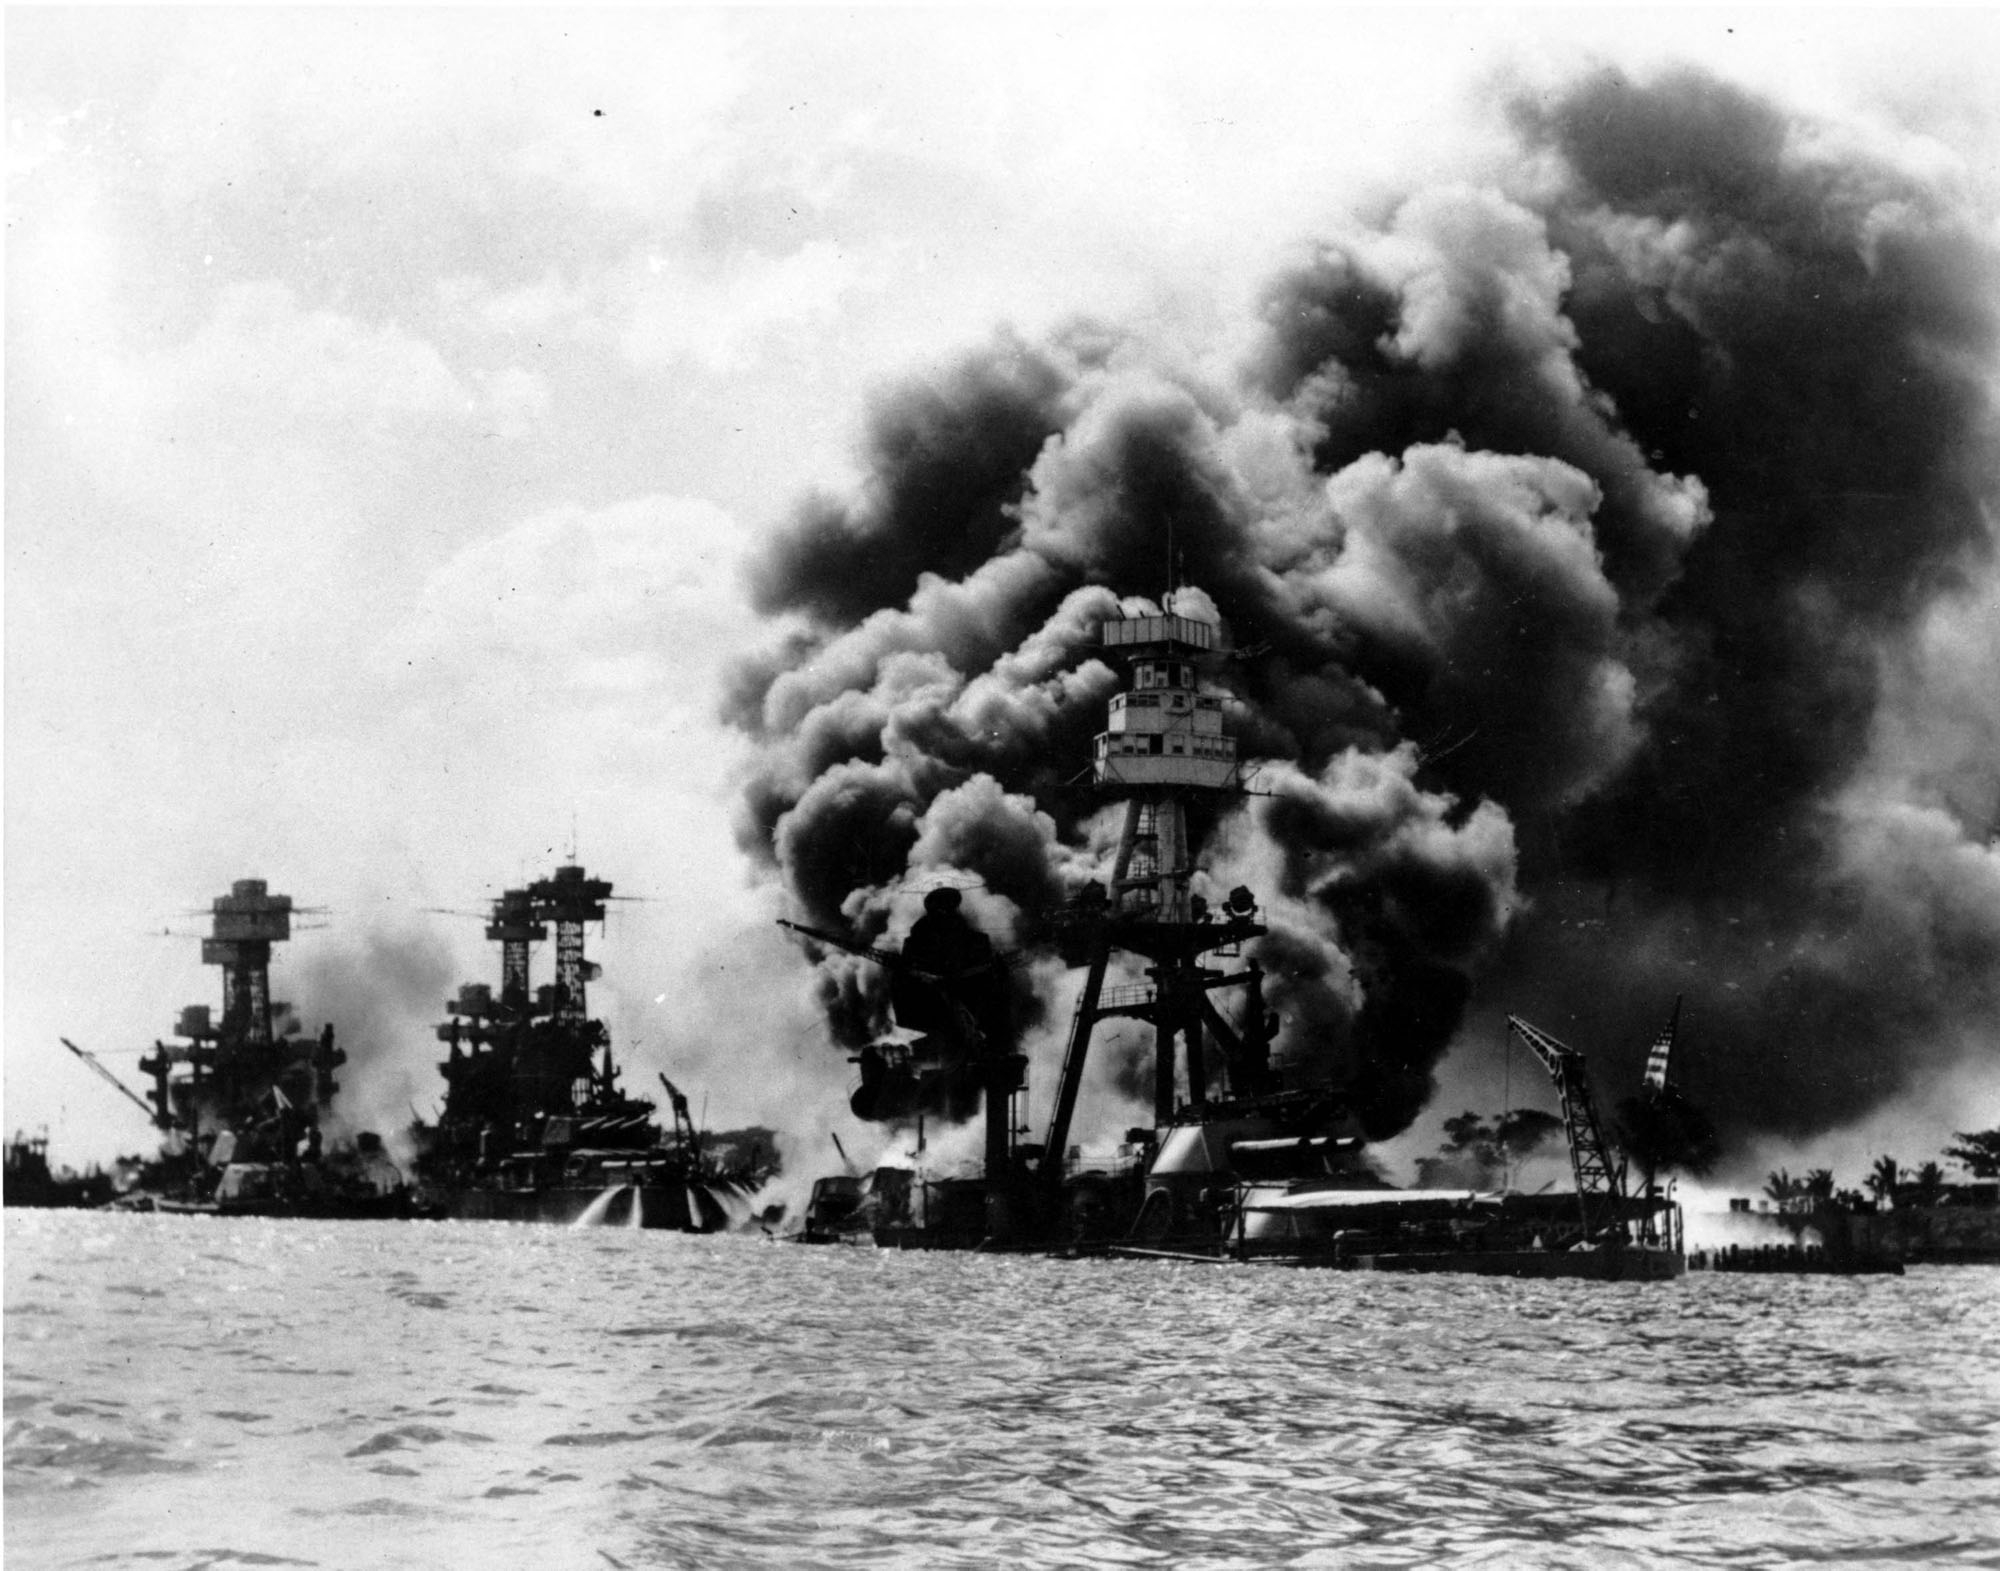 USS West Virginia, USS Tennessee, and USS Arizona during the Pearl Harbor attack, US Territory of Hawaii, 7 Dec 1941